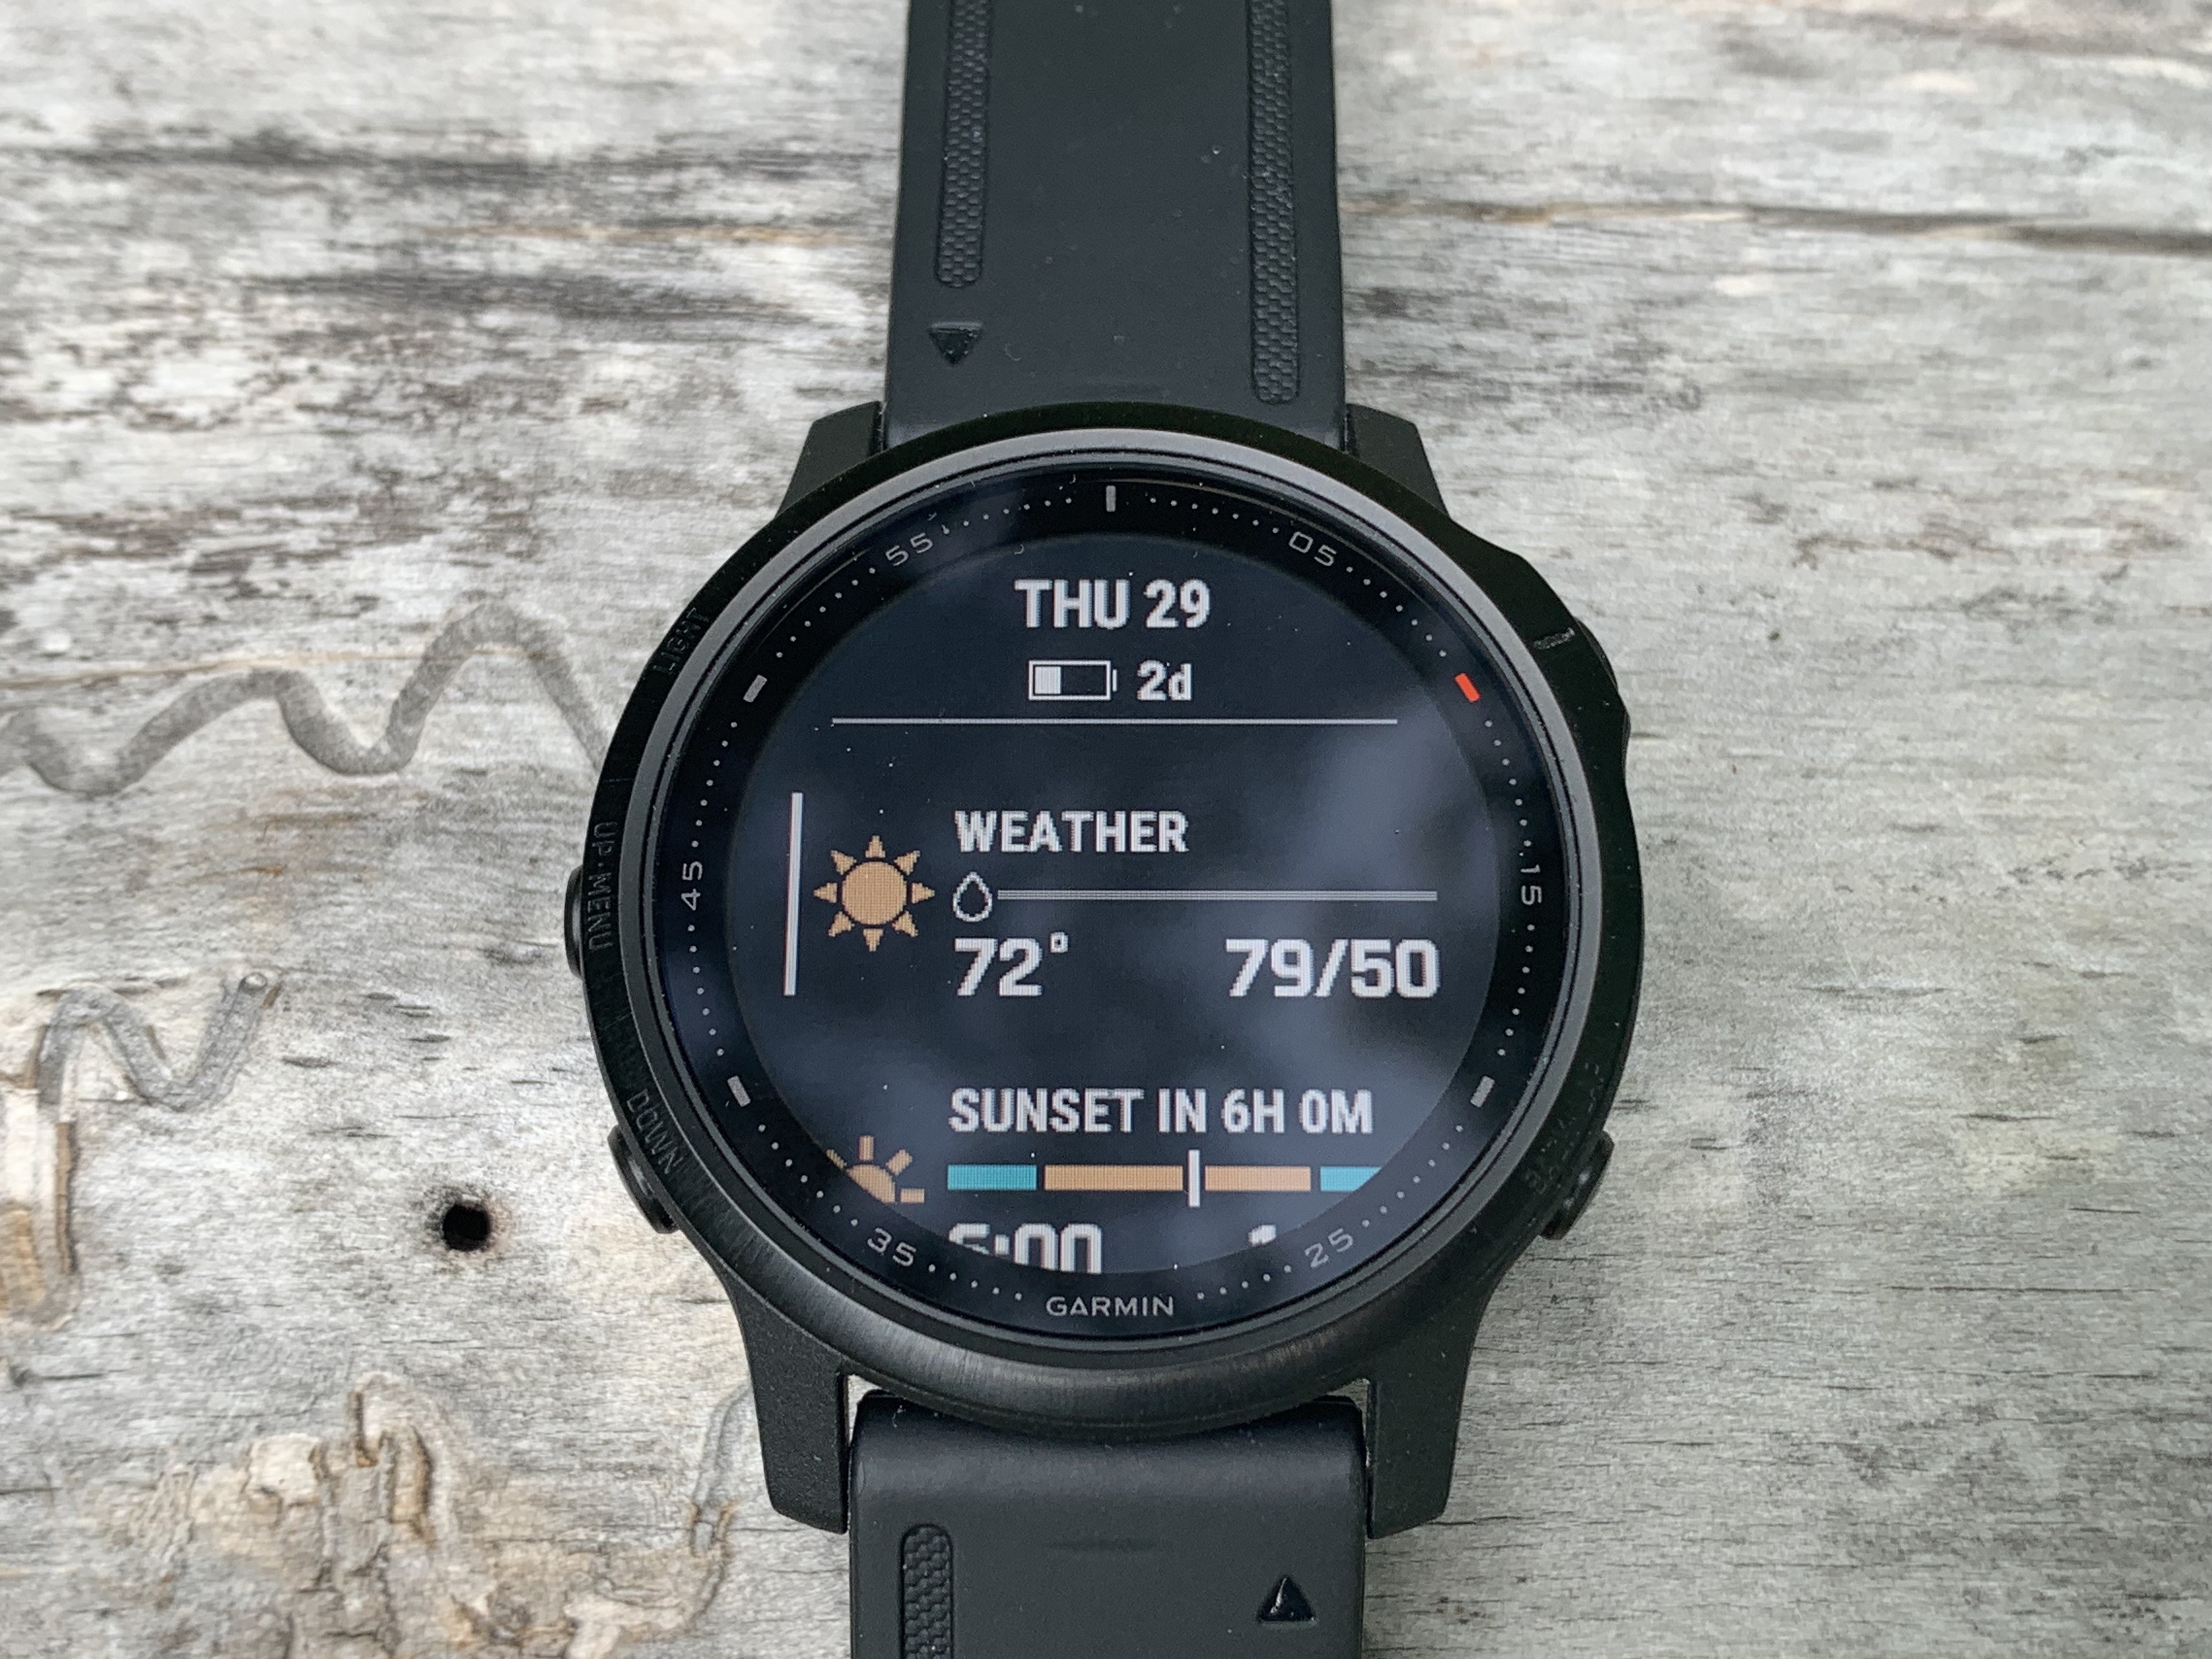 Hands-on with Garmin's high-end Fenix 5 multisport watches - CNET